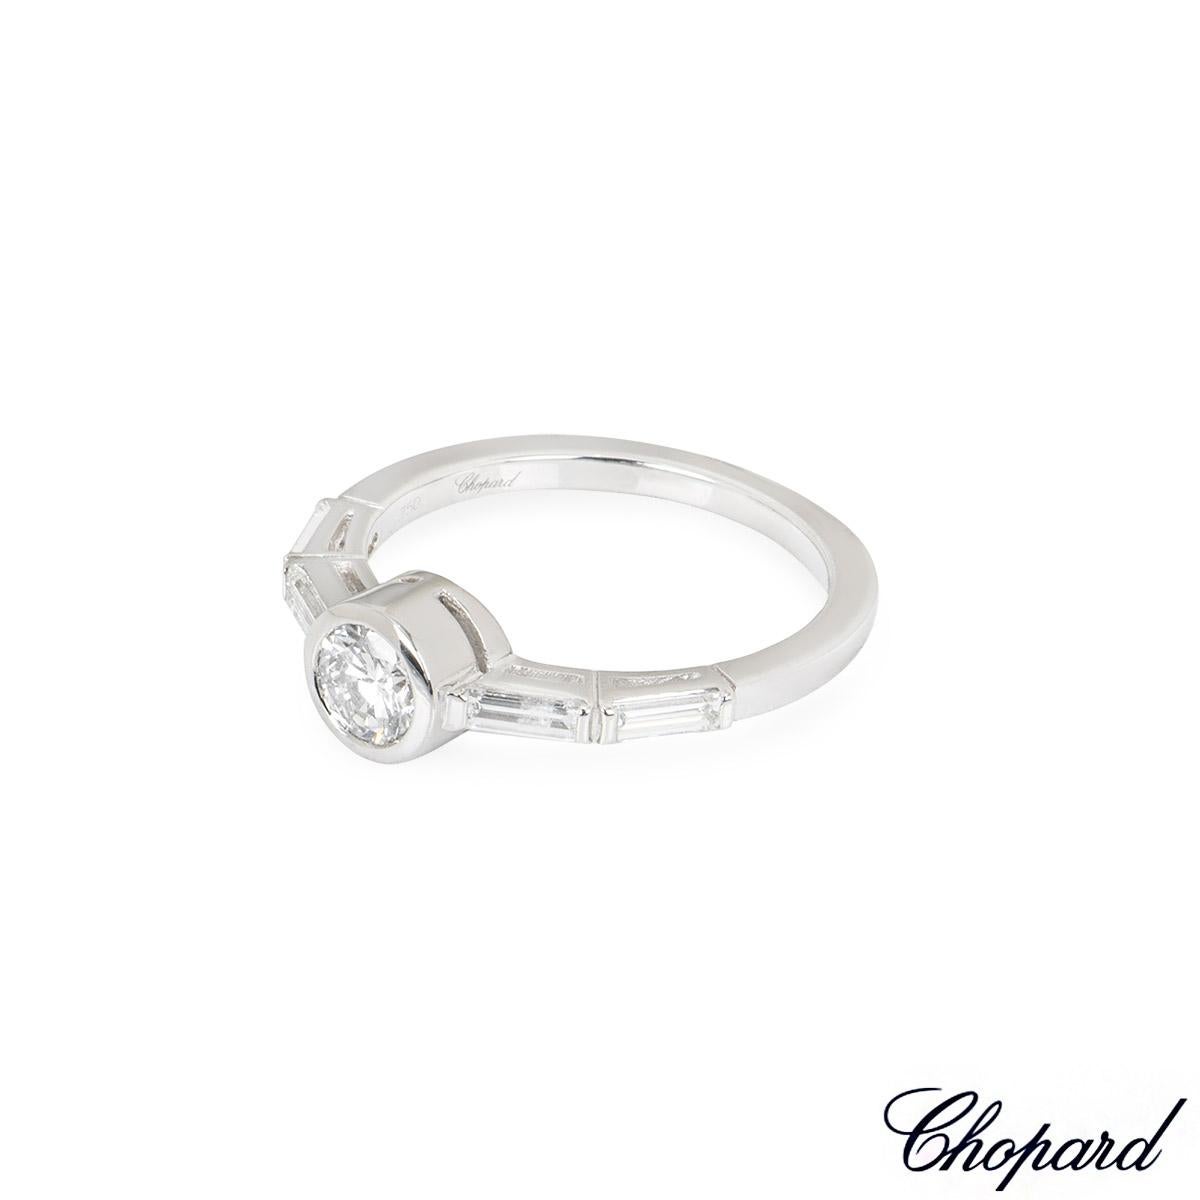 Chopard White Gold Diamond Engagement Ring 82/3948-1110 In New Condition For Sale In London, GB